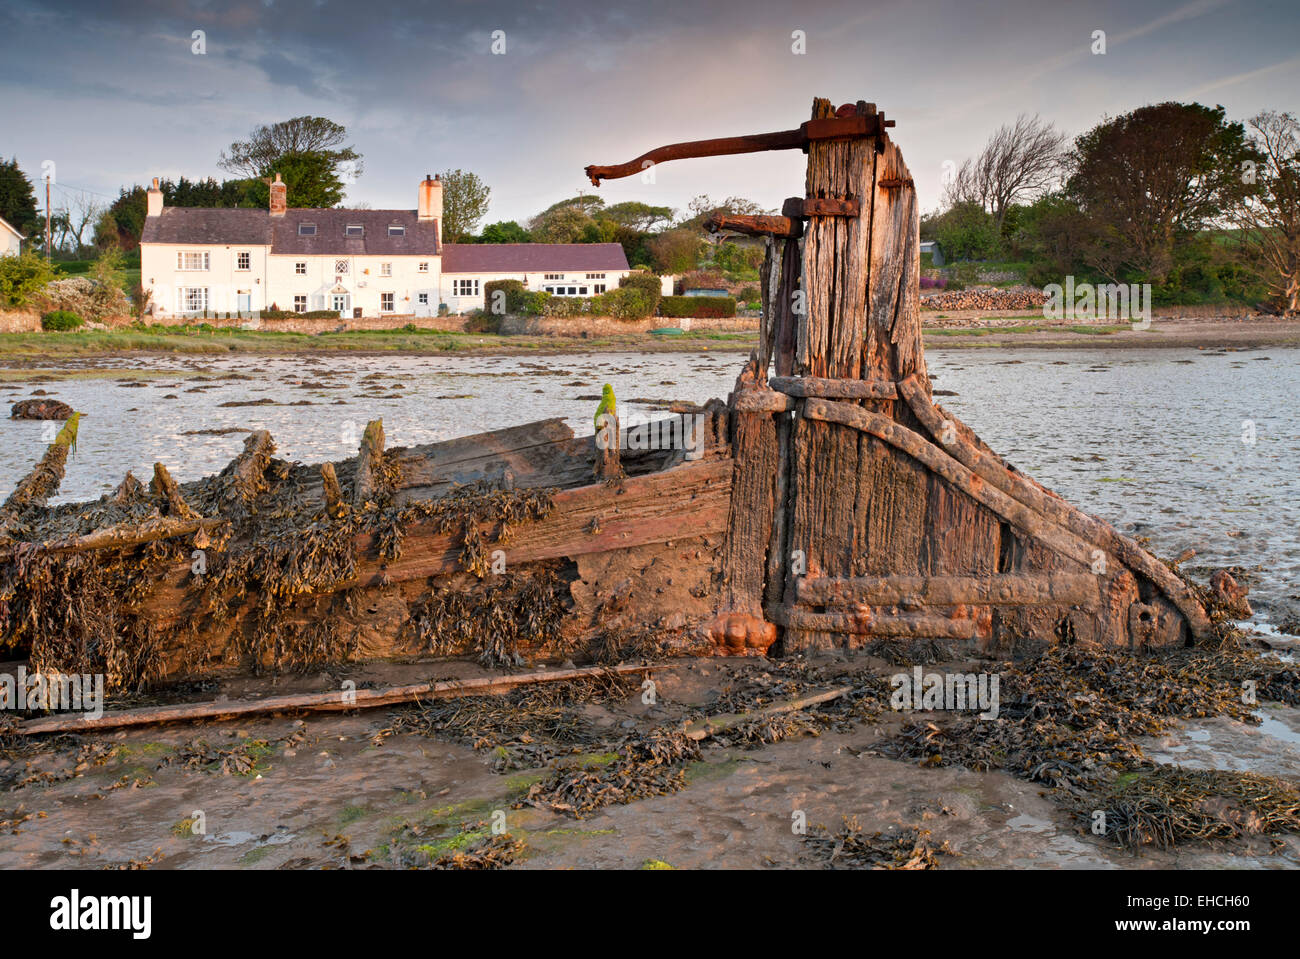 Wreck of The Seven Sisters and Holiday Cottages at Moel y don, Menai Straits, Anglesey, North Wales, UK Stock Photo